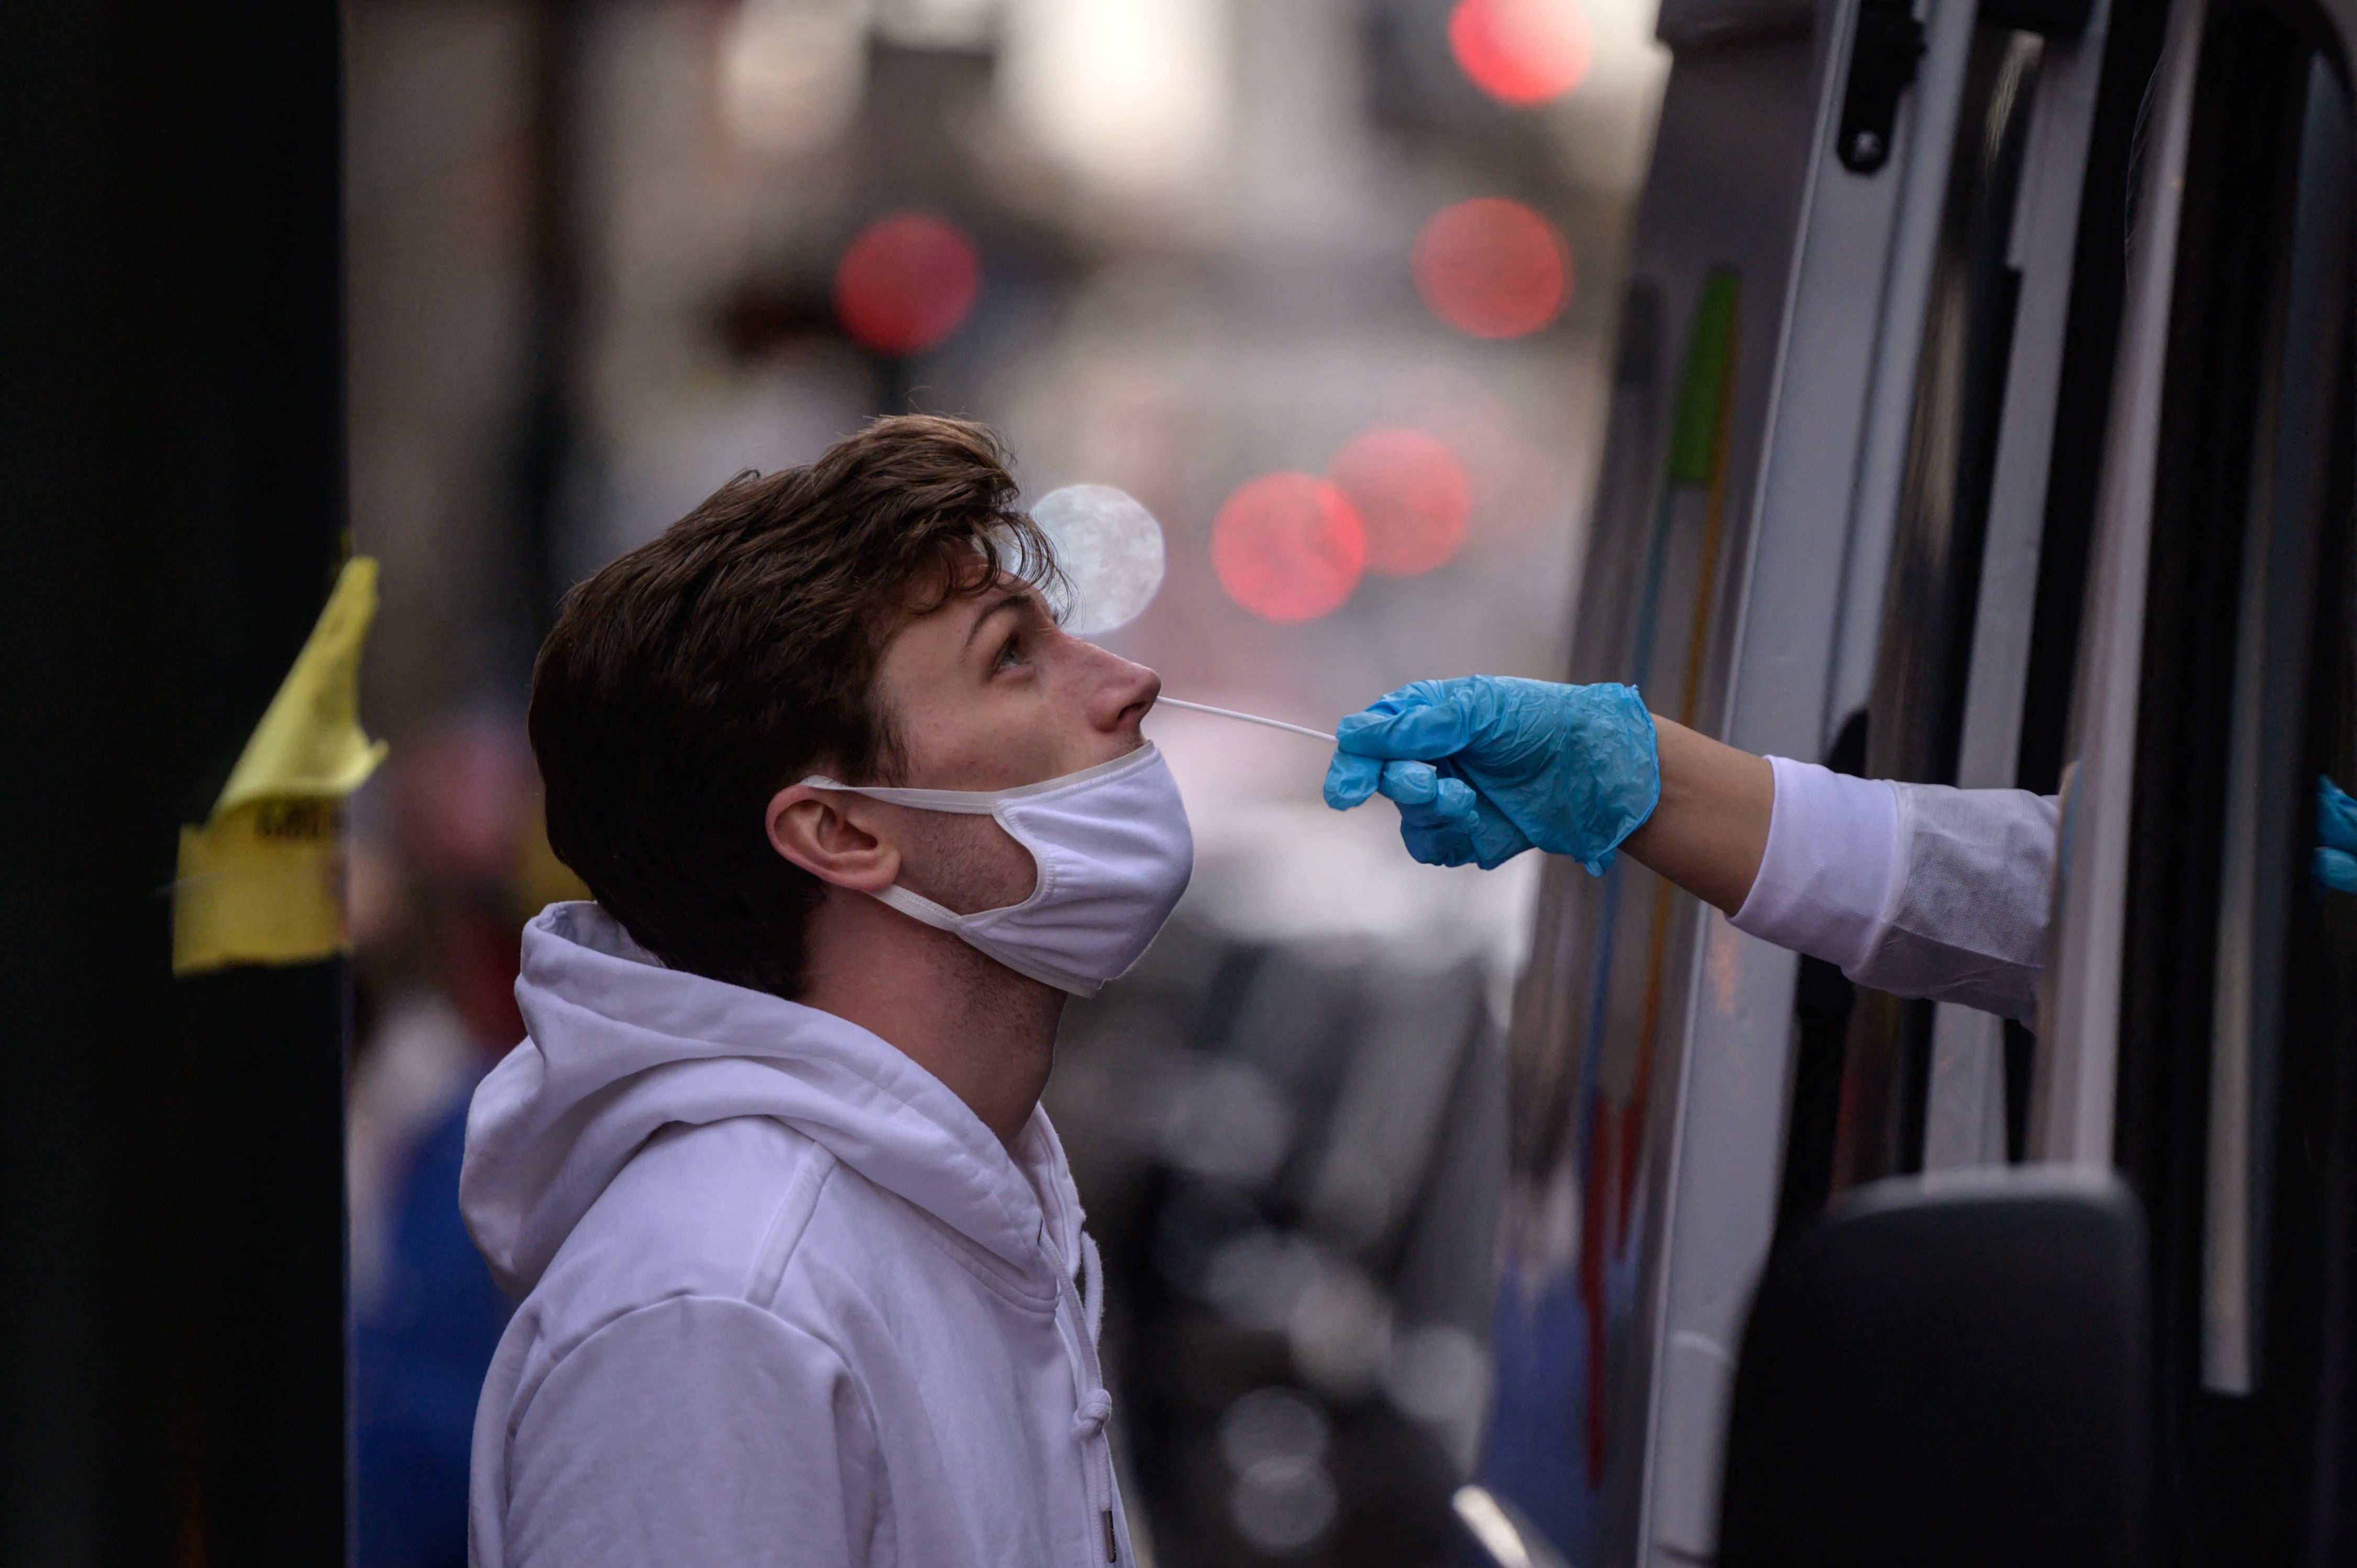 A man receives a nasal swab during a test for Covid-19 at a street-side testing booth in New York on December 17, 2021